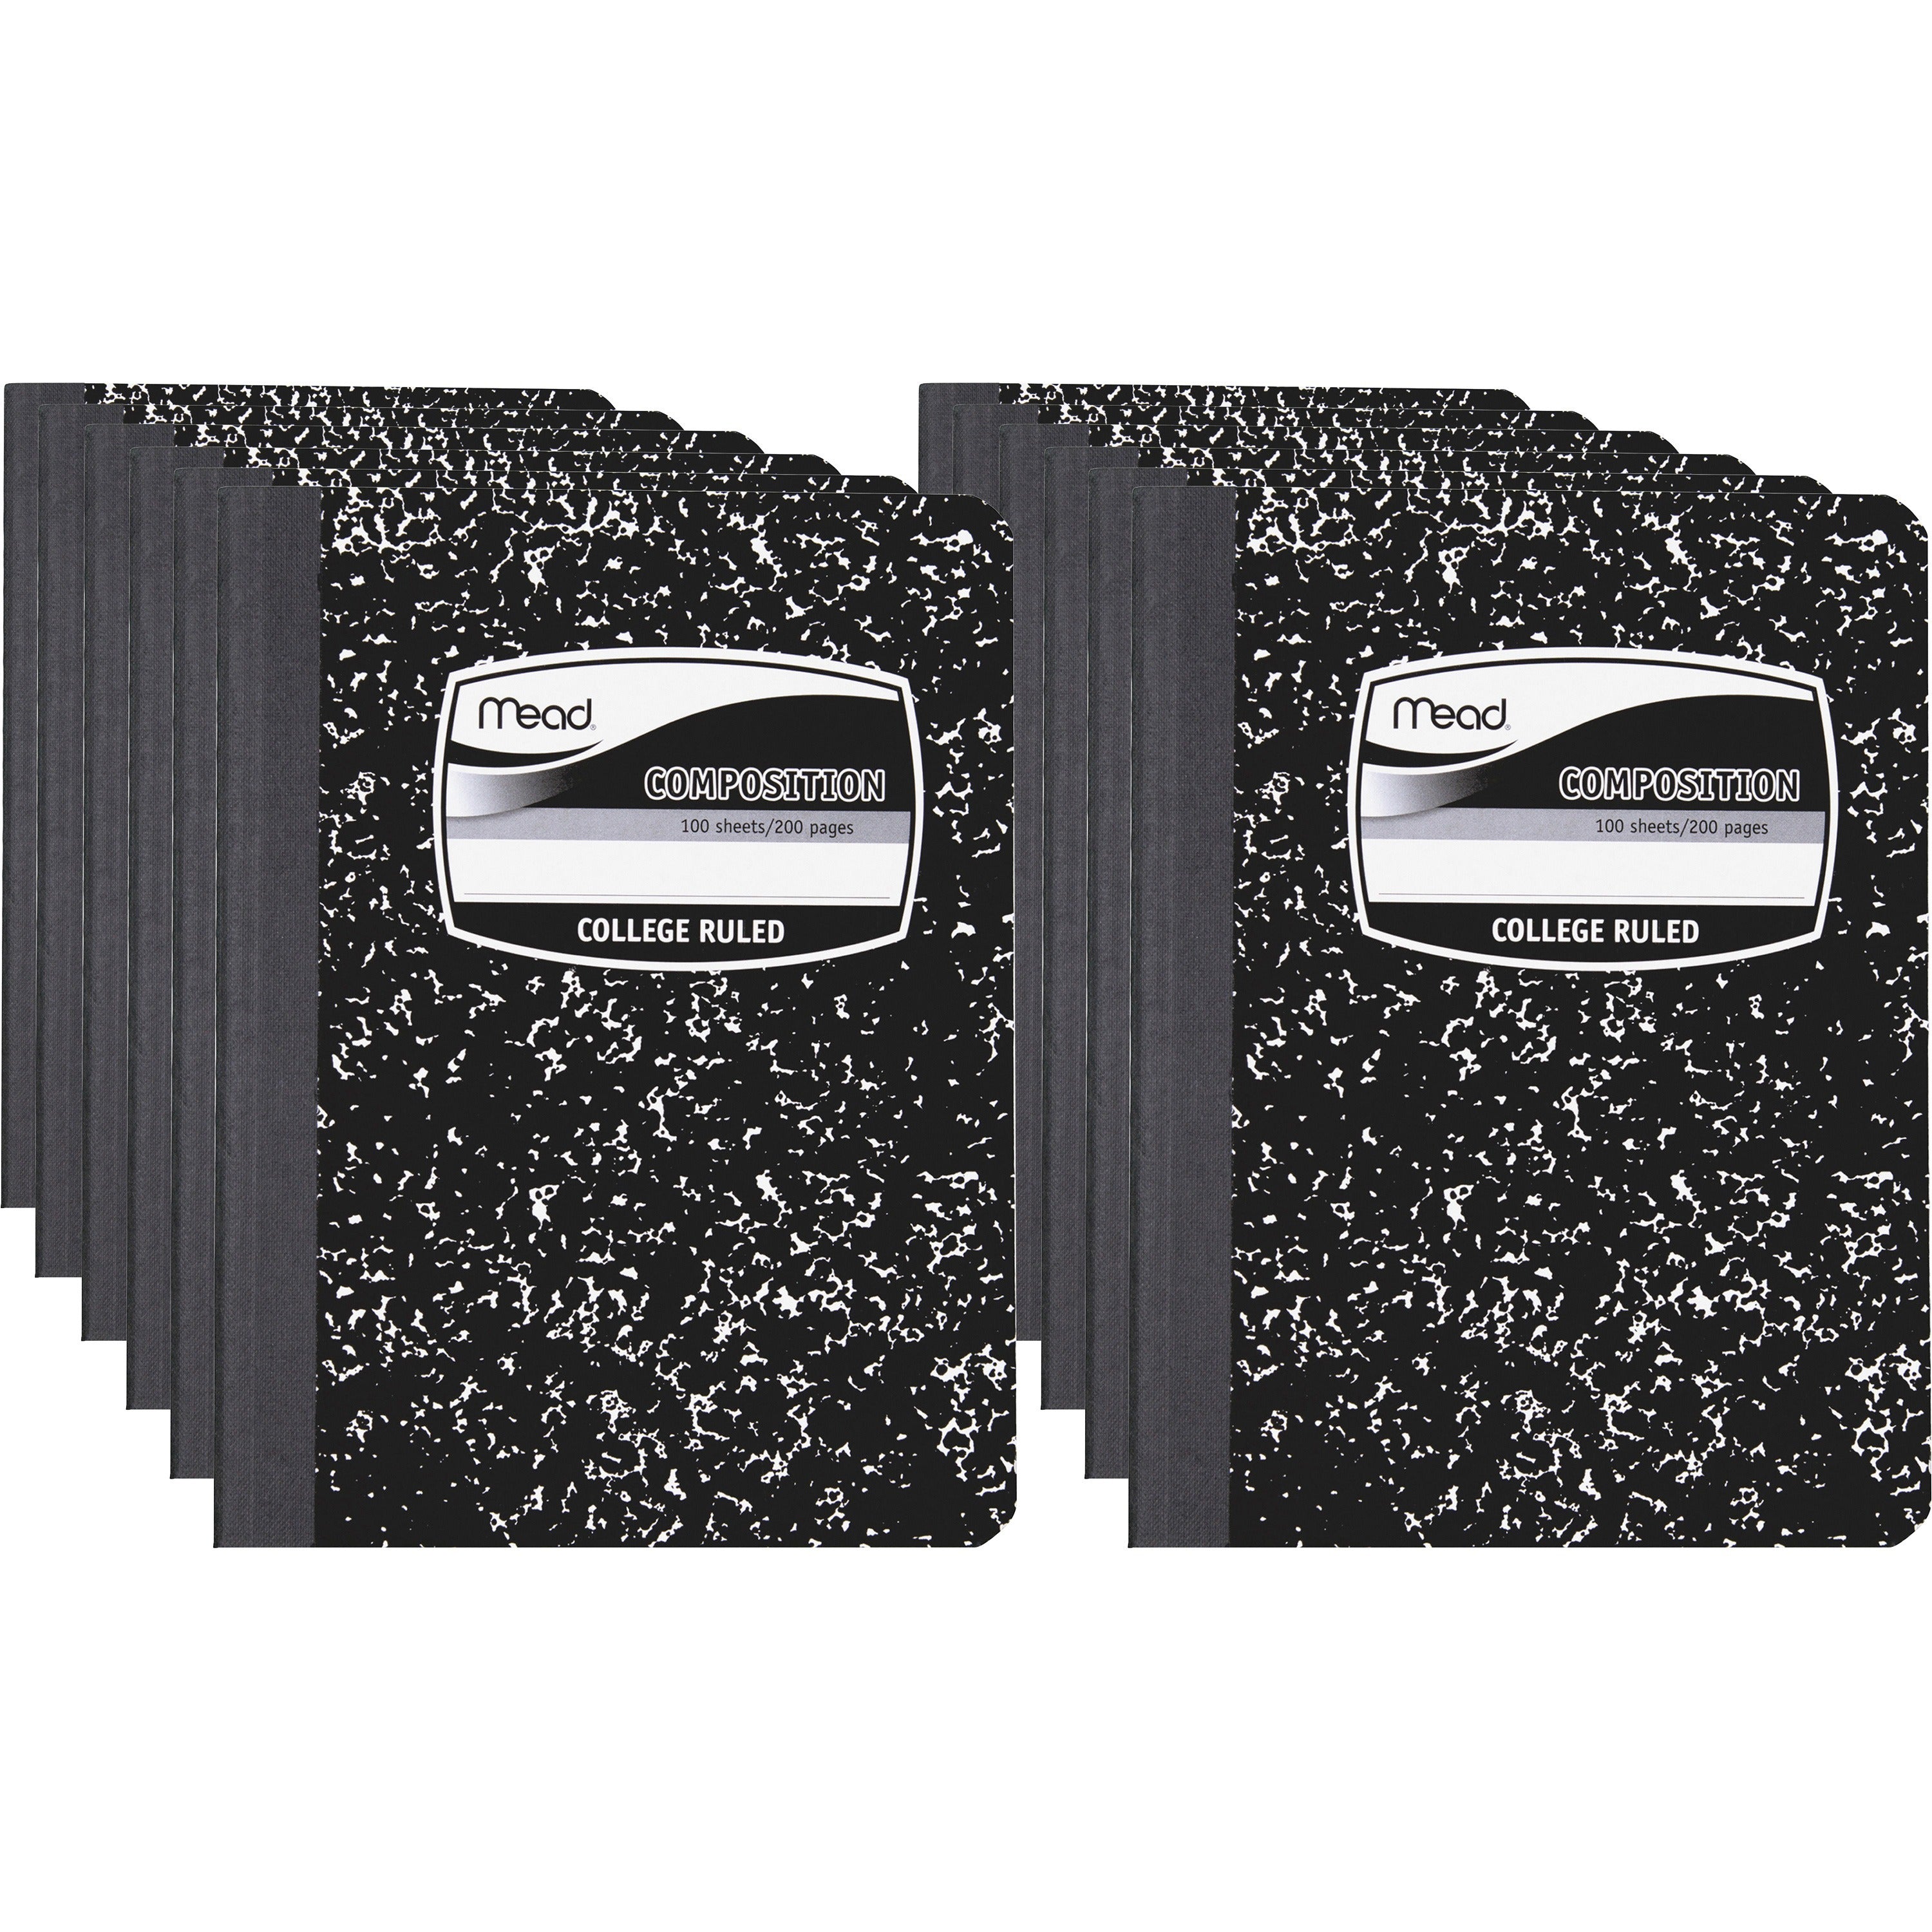 mead-composition-book-sewn-7-1-2-x-9-3-4-white-paper-black-marble-cover-12-carton_mea09932ct - 1